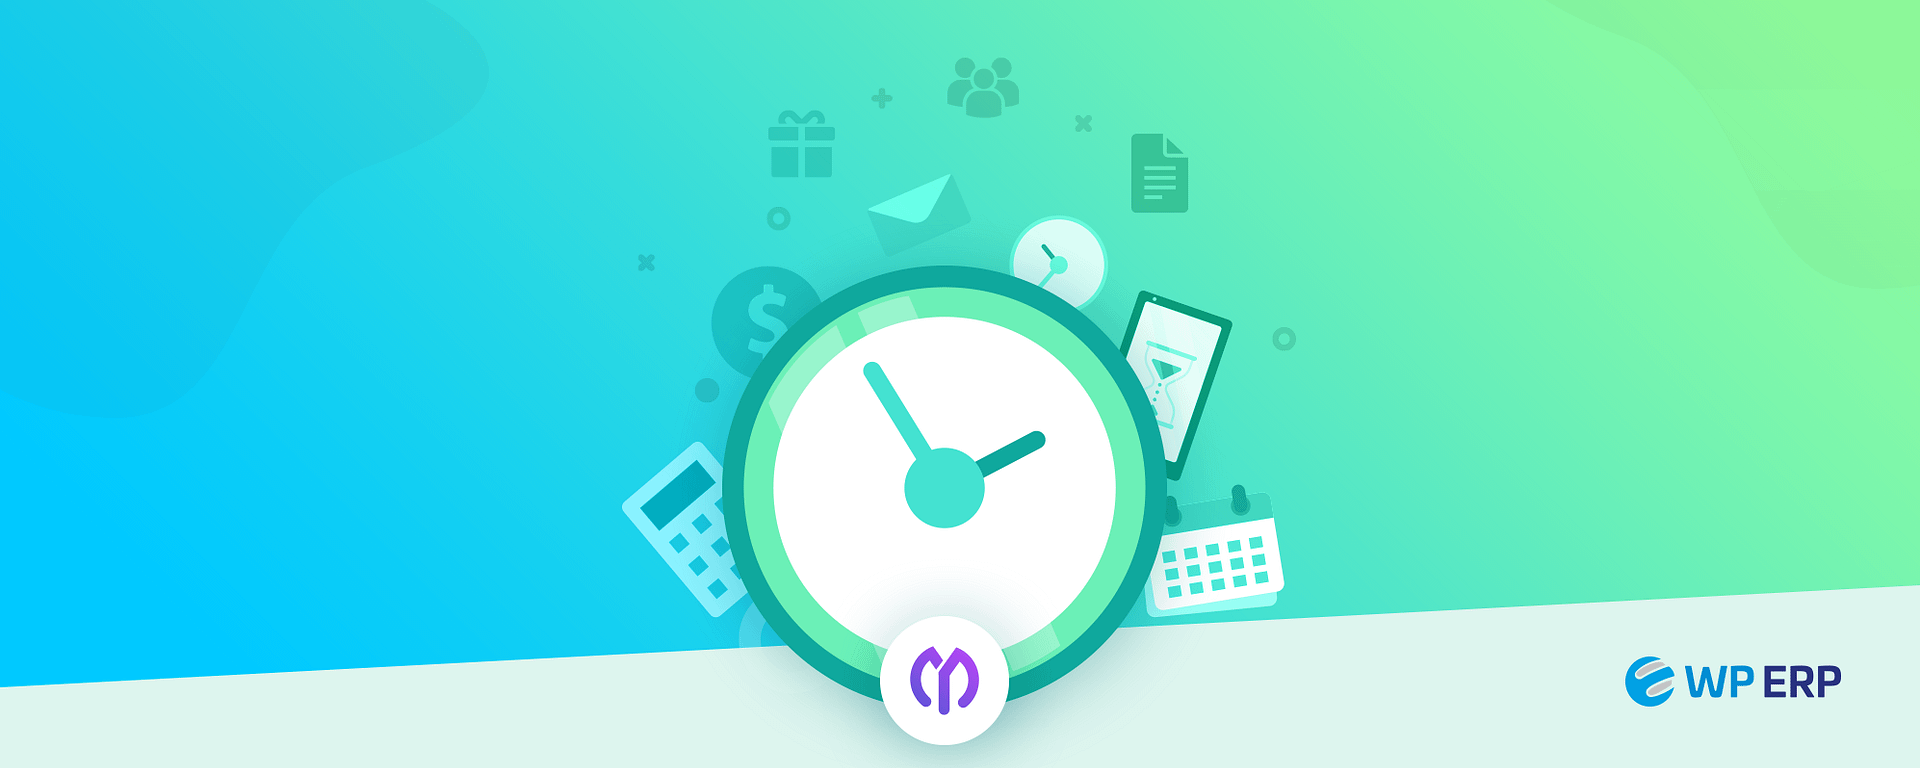 benefits of time management software for your small business projects 1.png